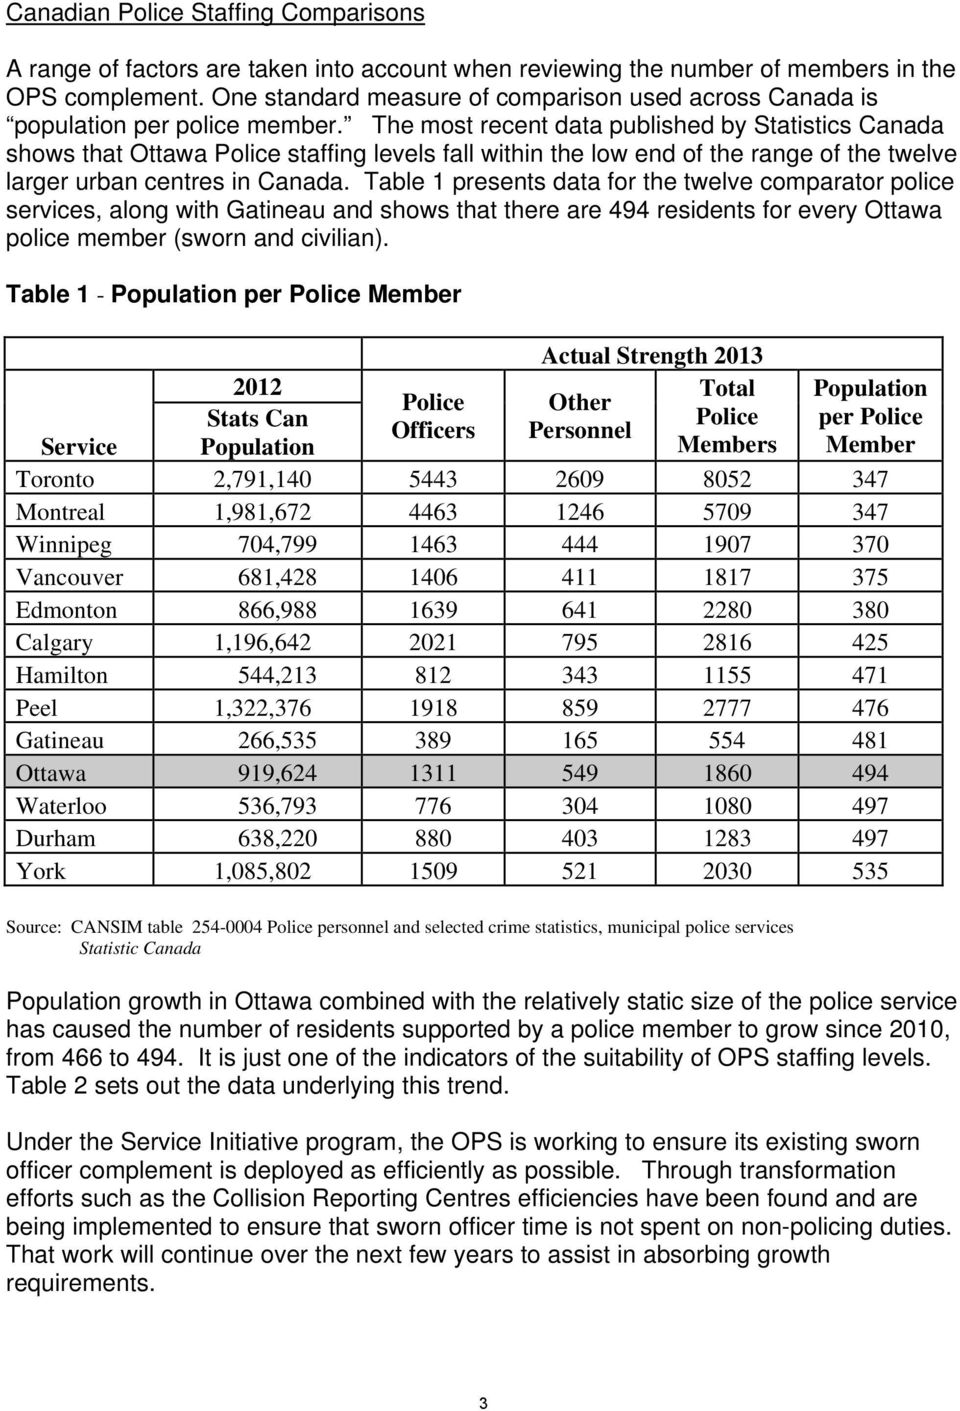 The most recent data published by Statistics Canada shows that Ottawa Police staffing levels fall within the low end of the range of the twelve larger urban centres in Canada.